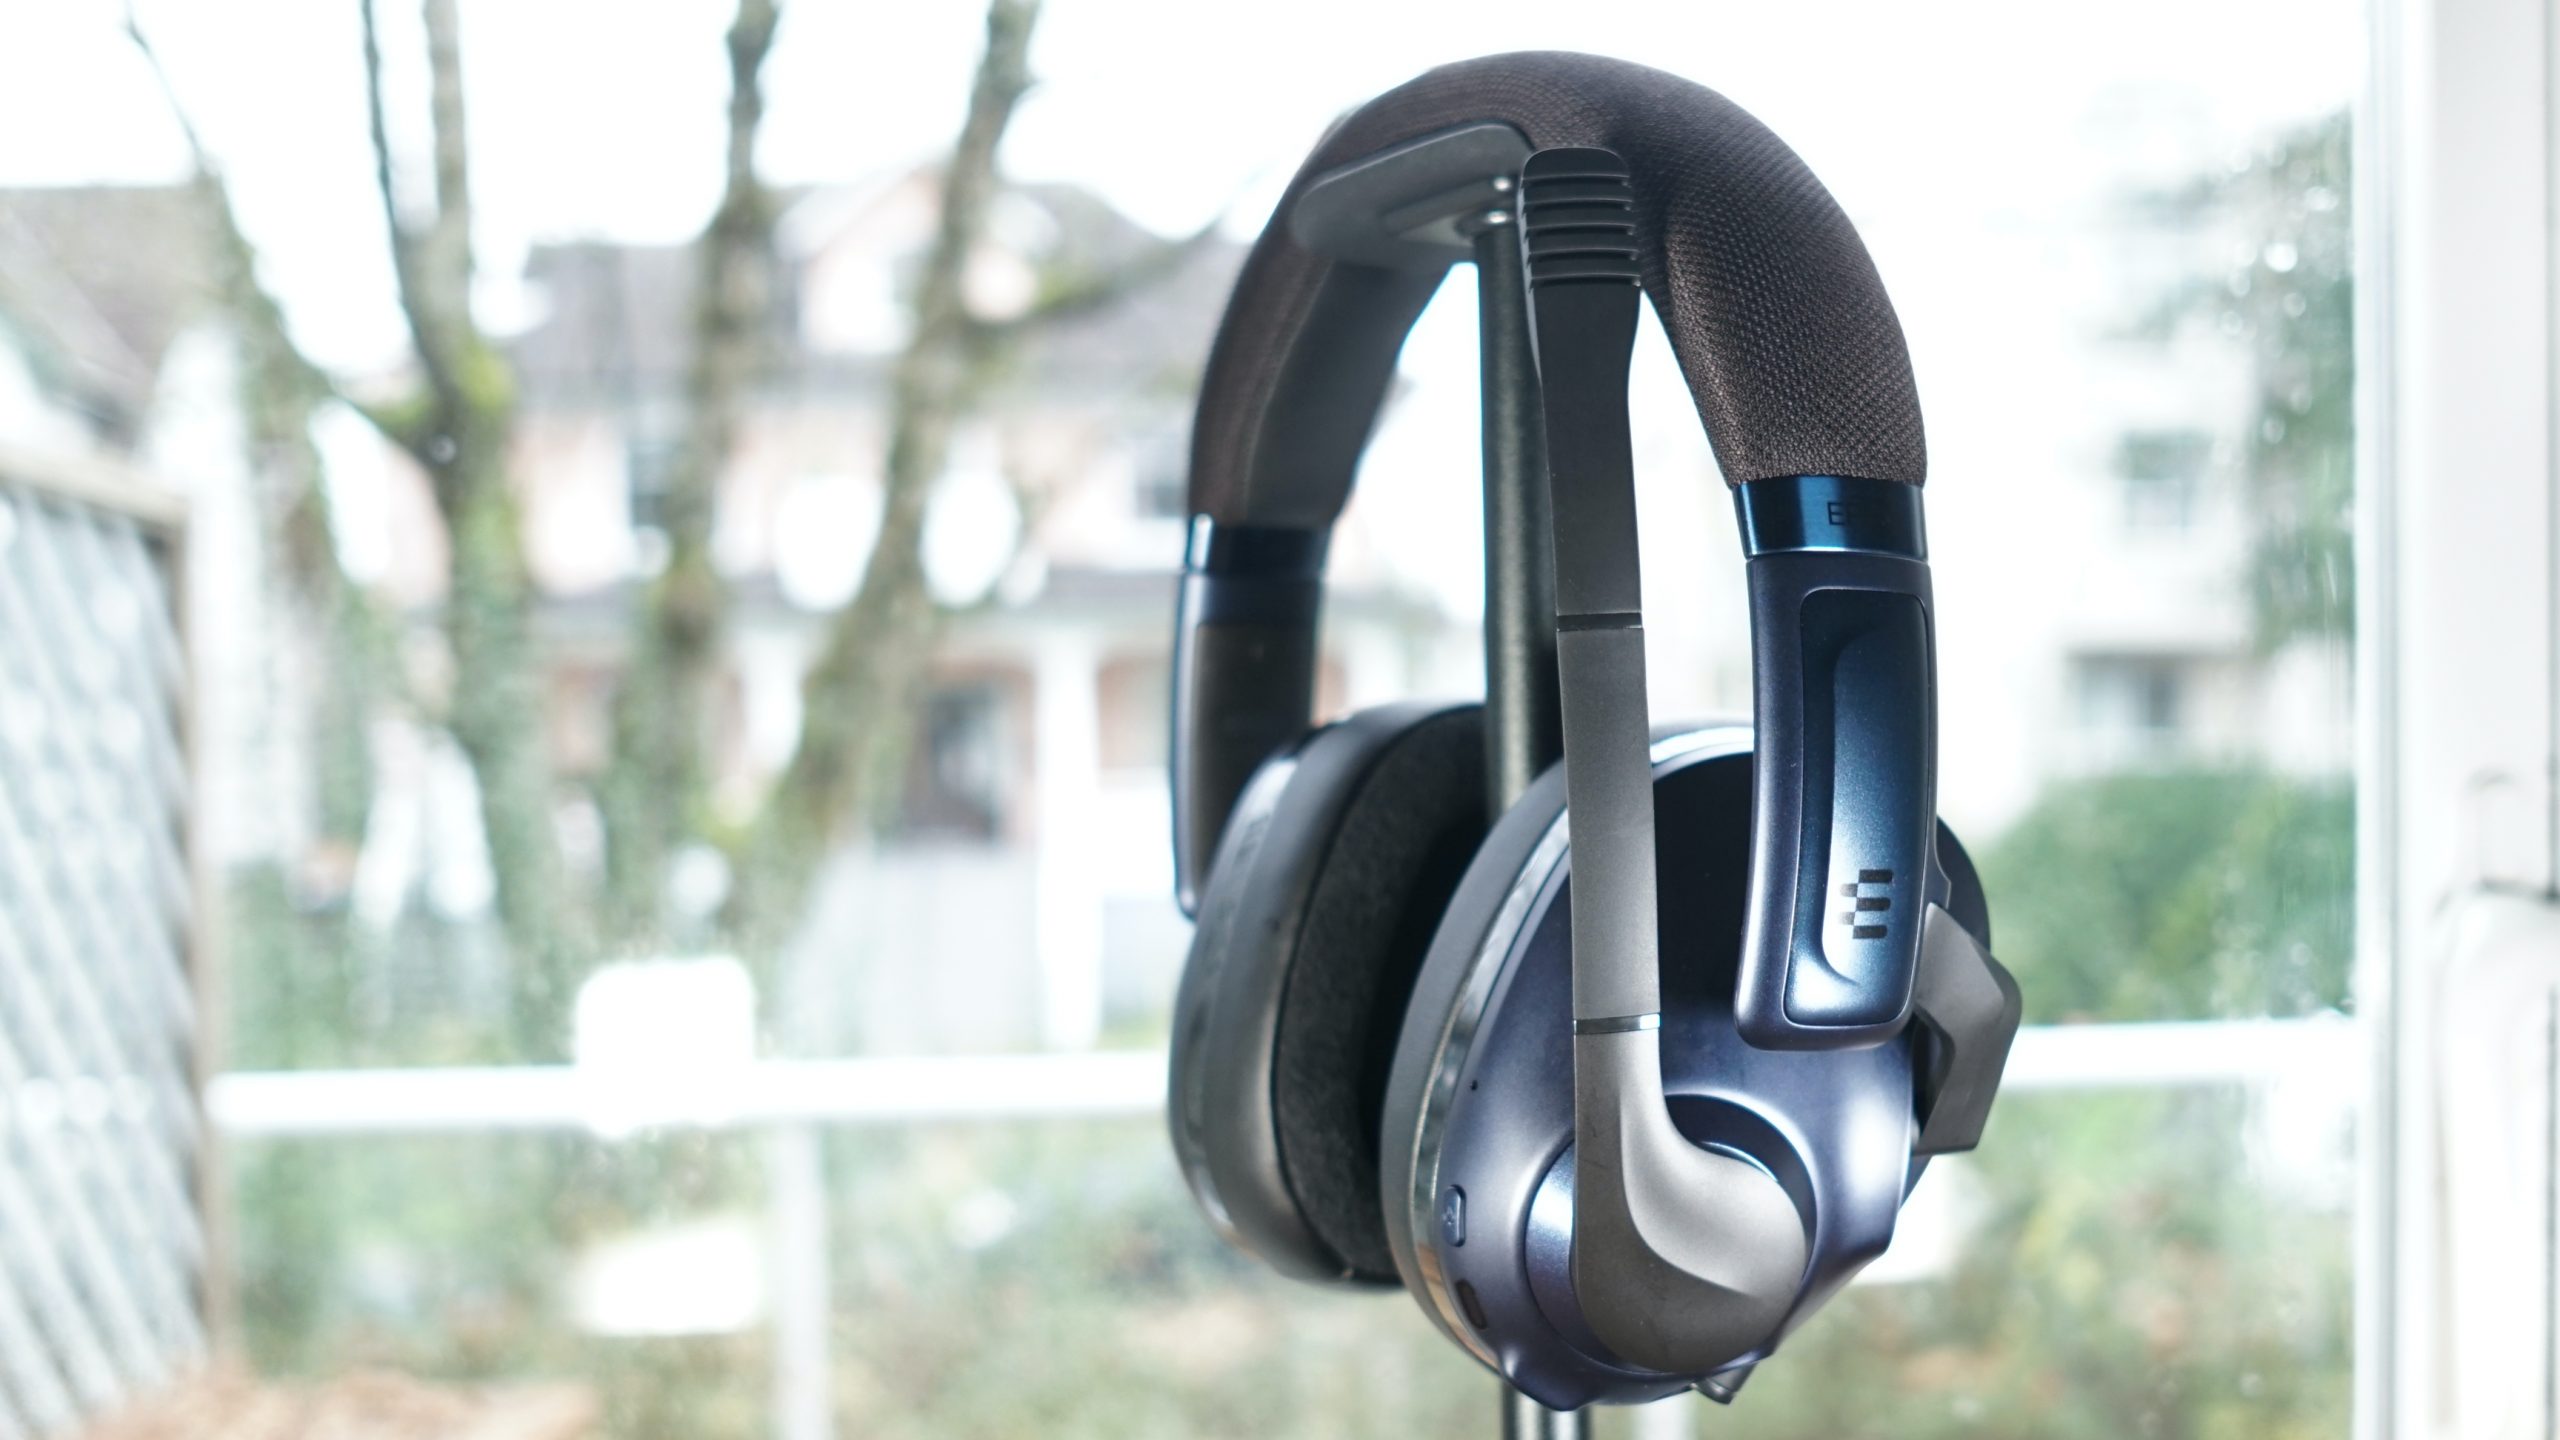 Premium wired gaming headset with INCREDIBLE detail - EPOS H6Pro